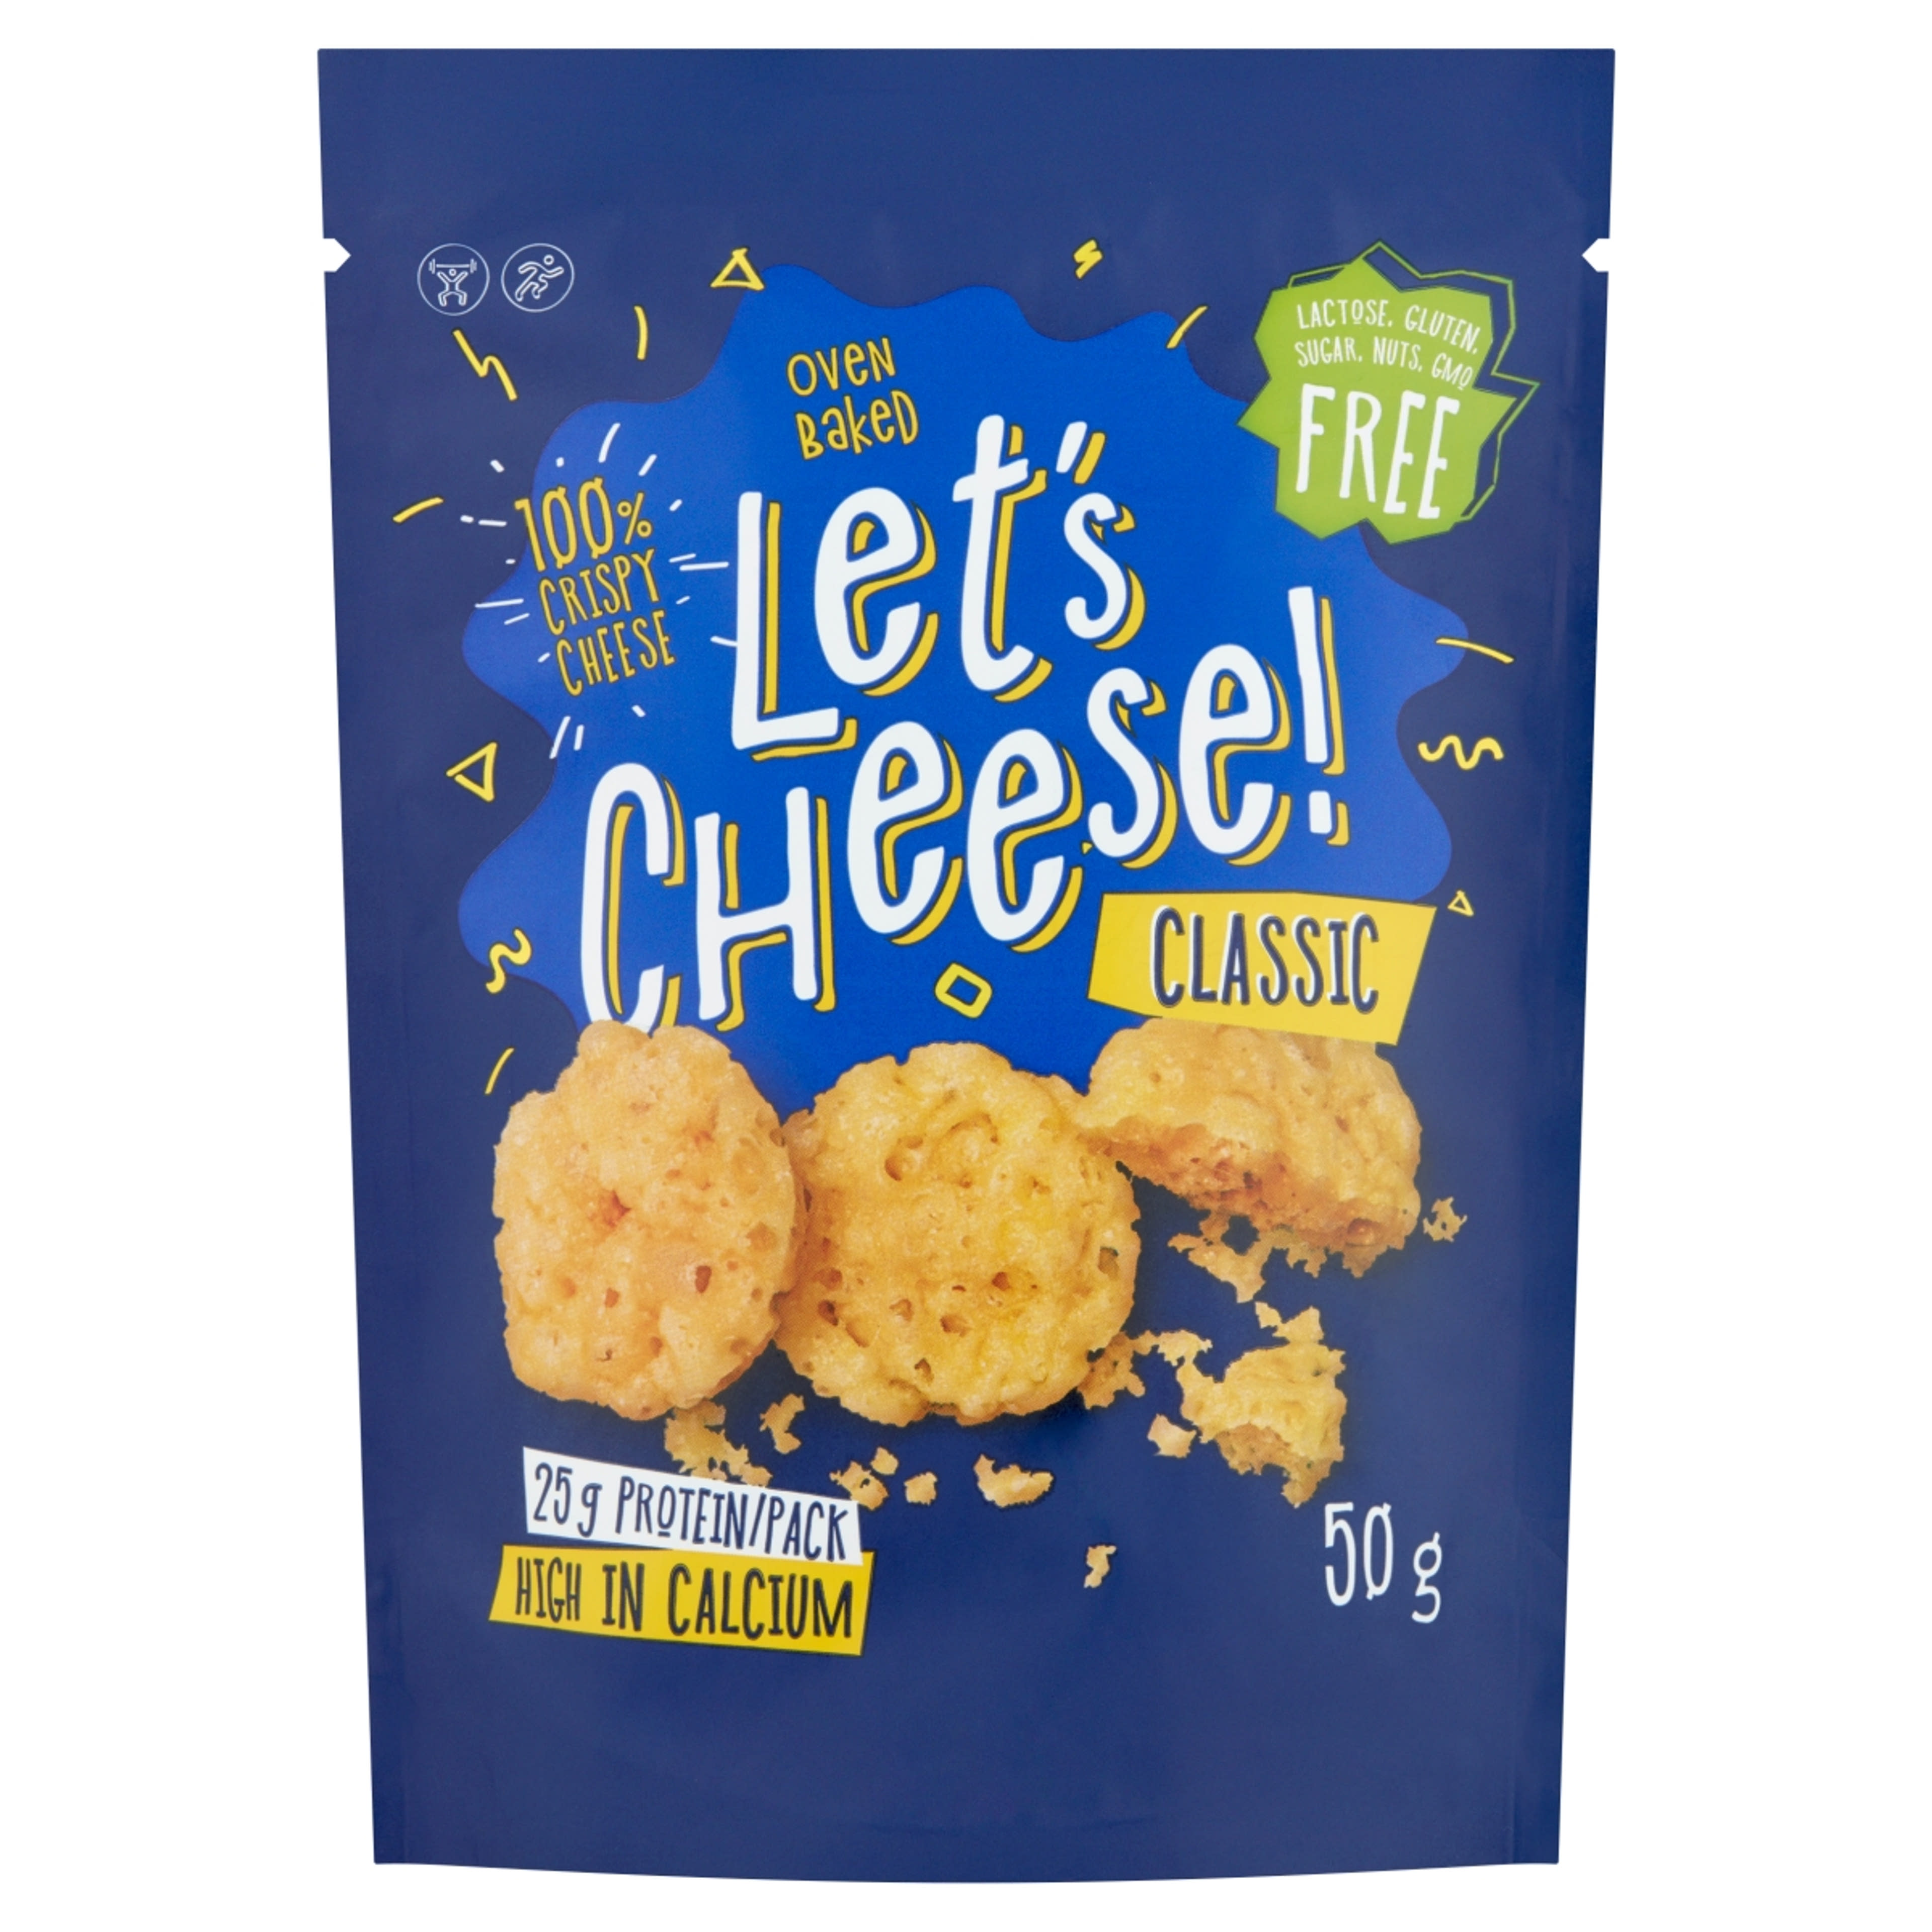 Let's Cheese Classic sajt snack - 50 g-1